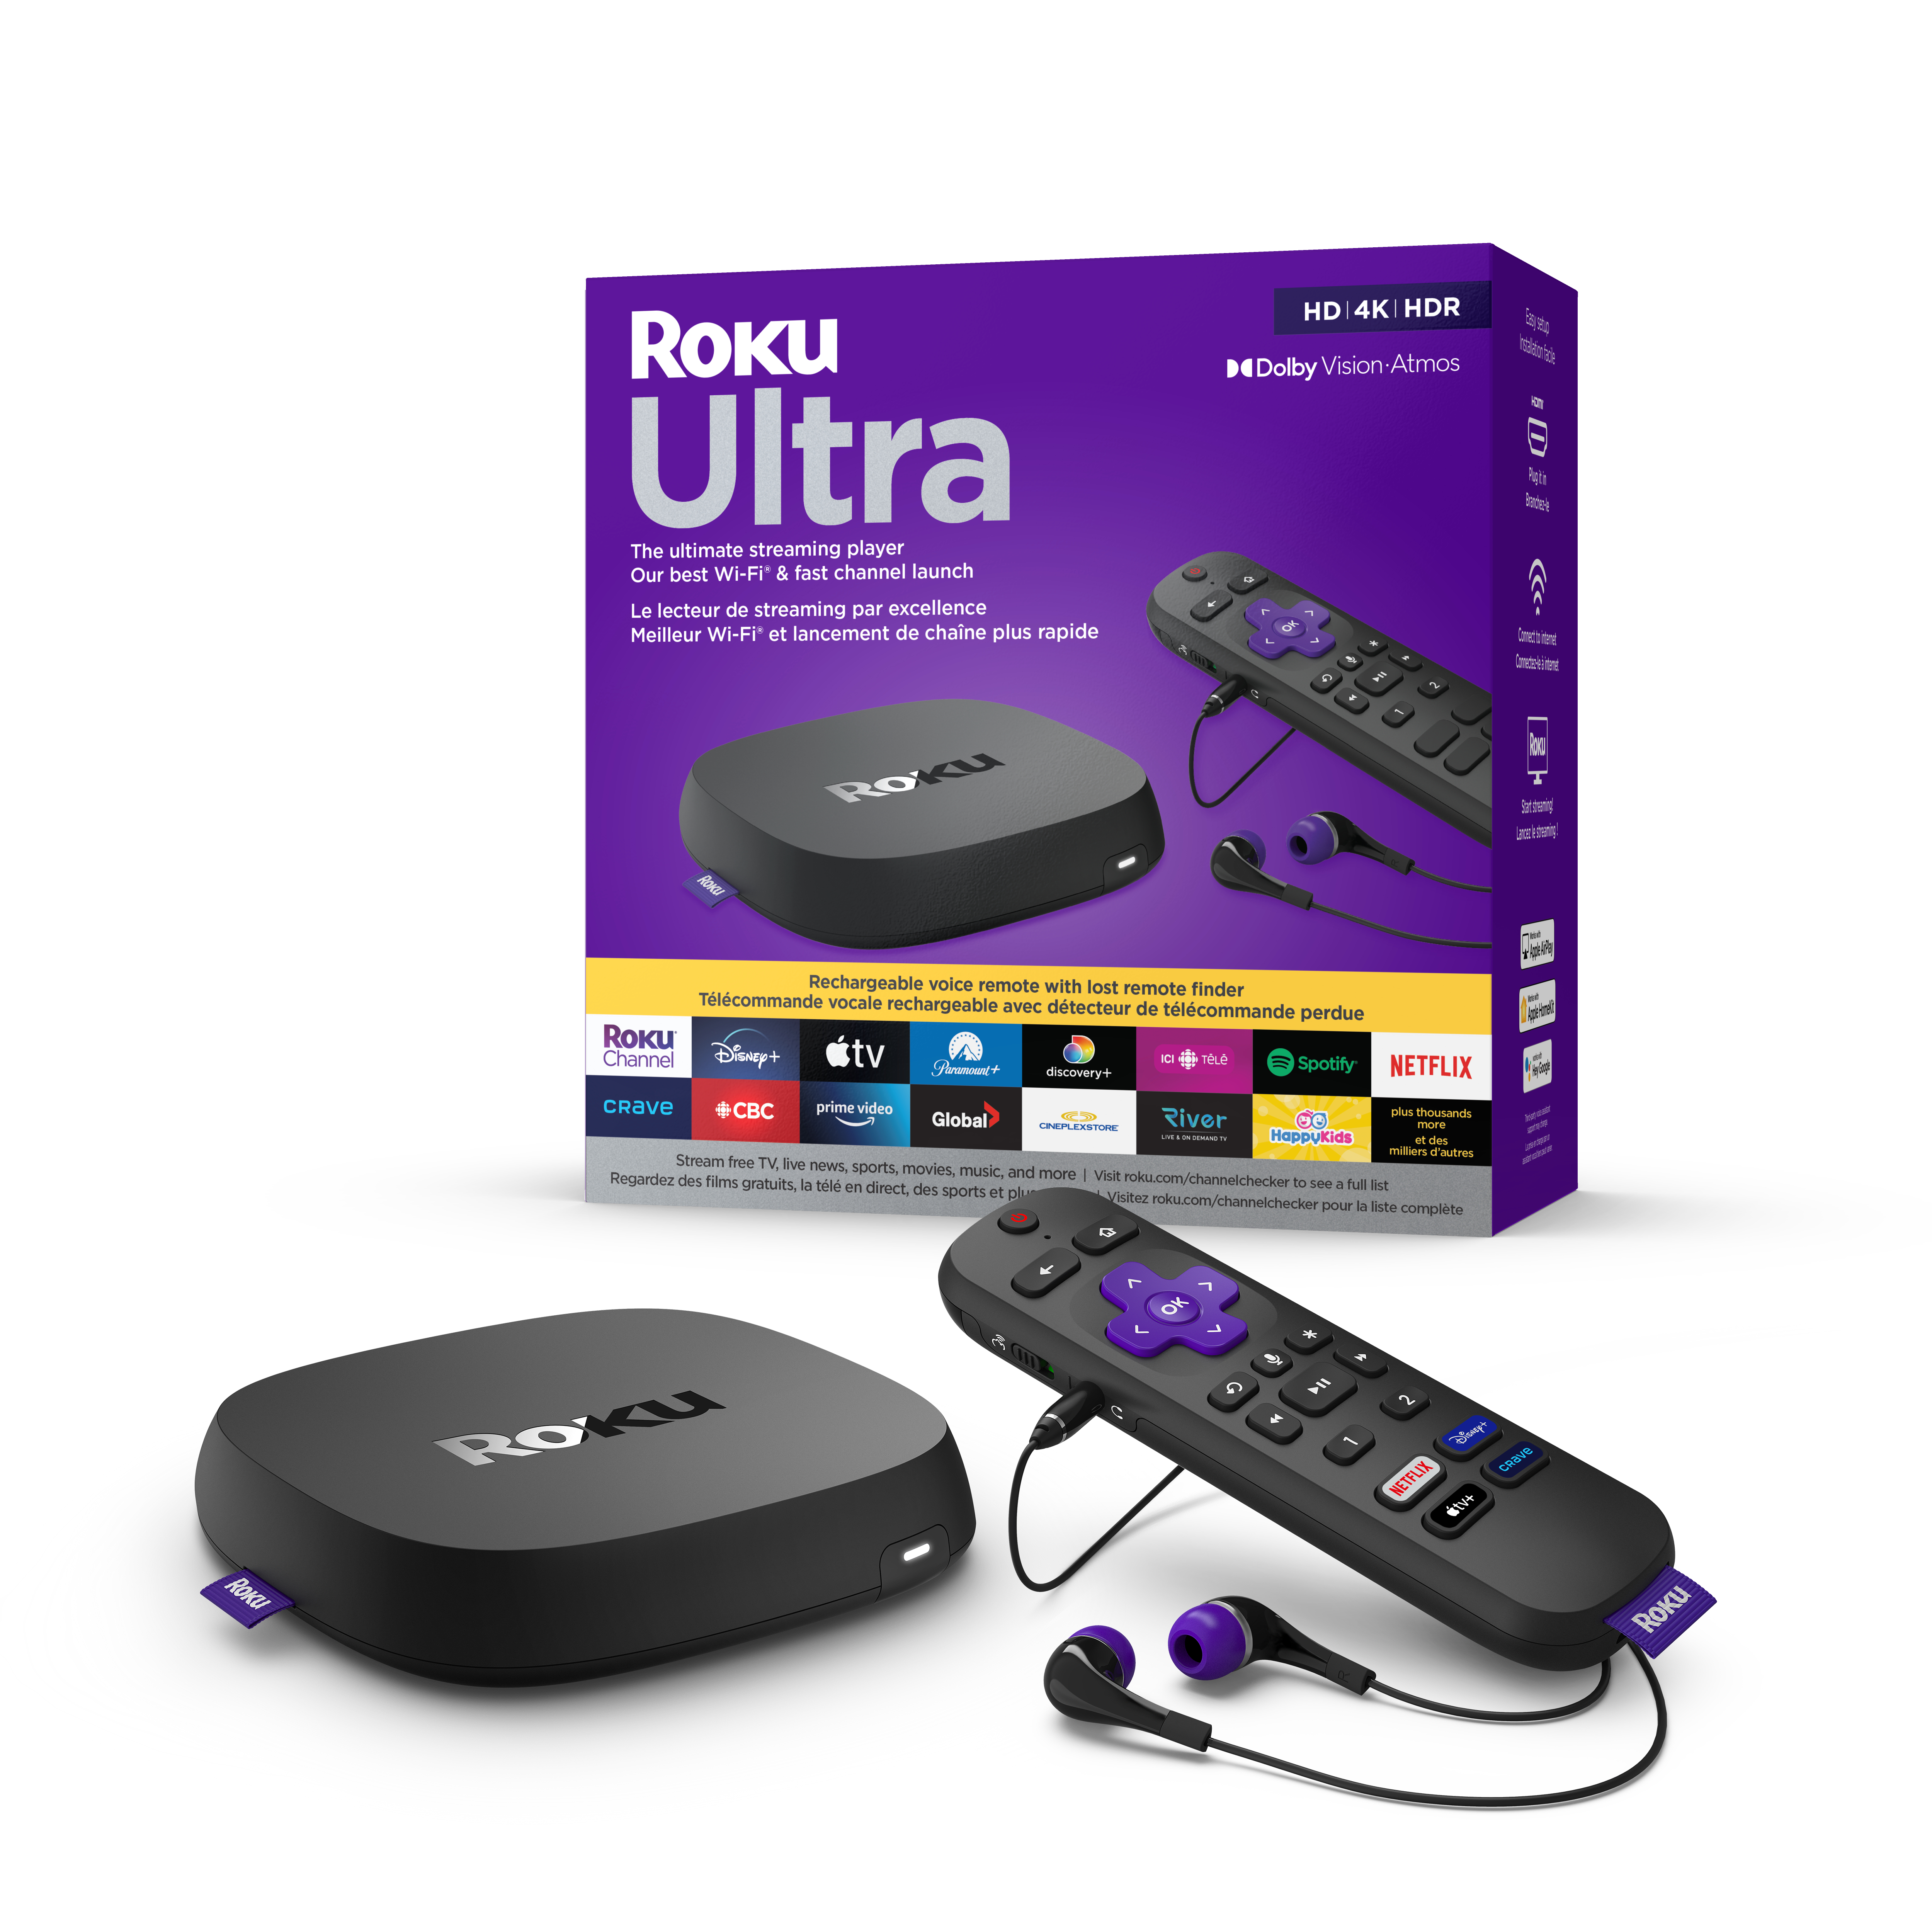 Roku Brings Roku Ultra, Its Most Powerful Streaming Player, to Canada